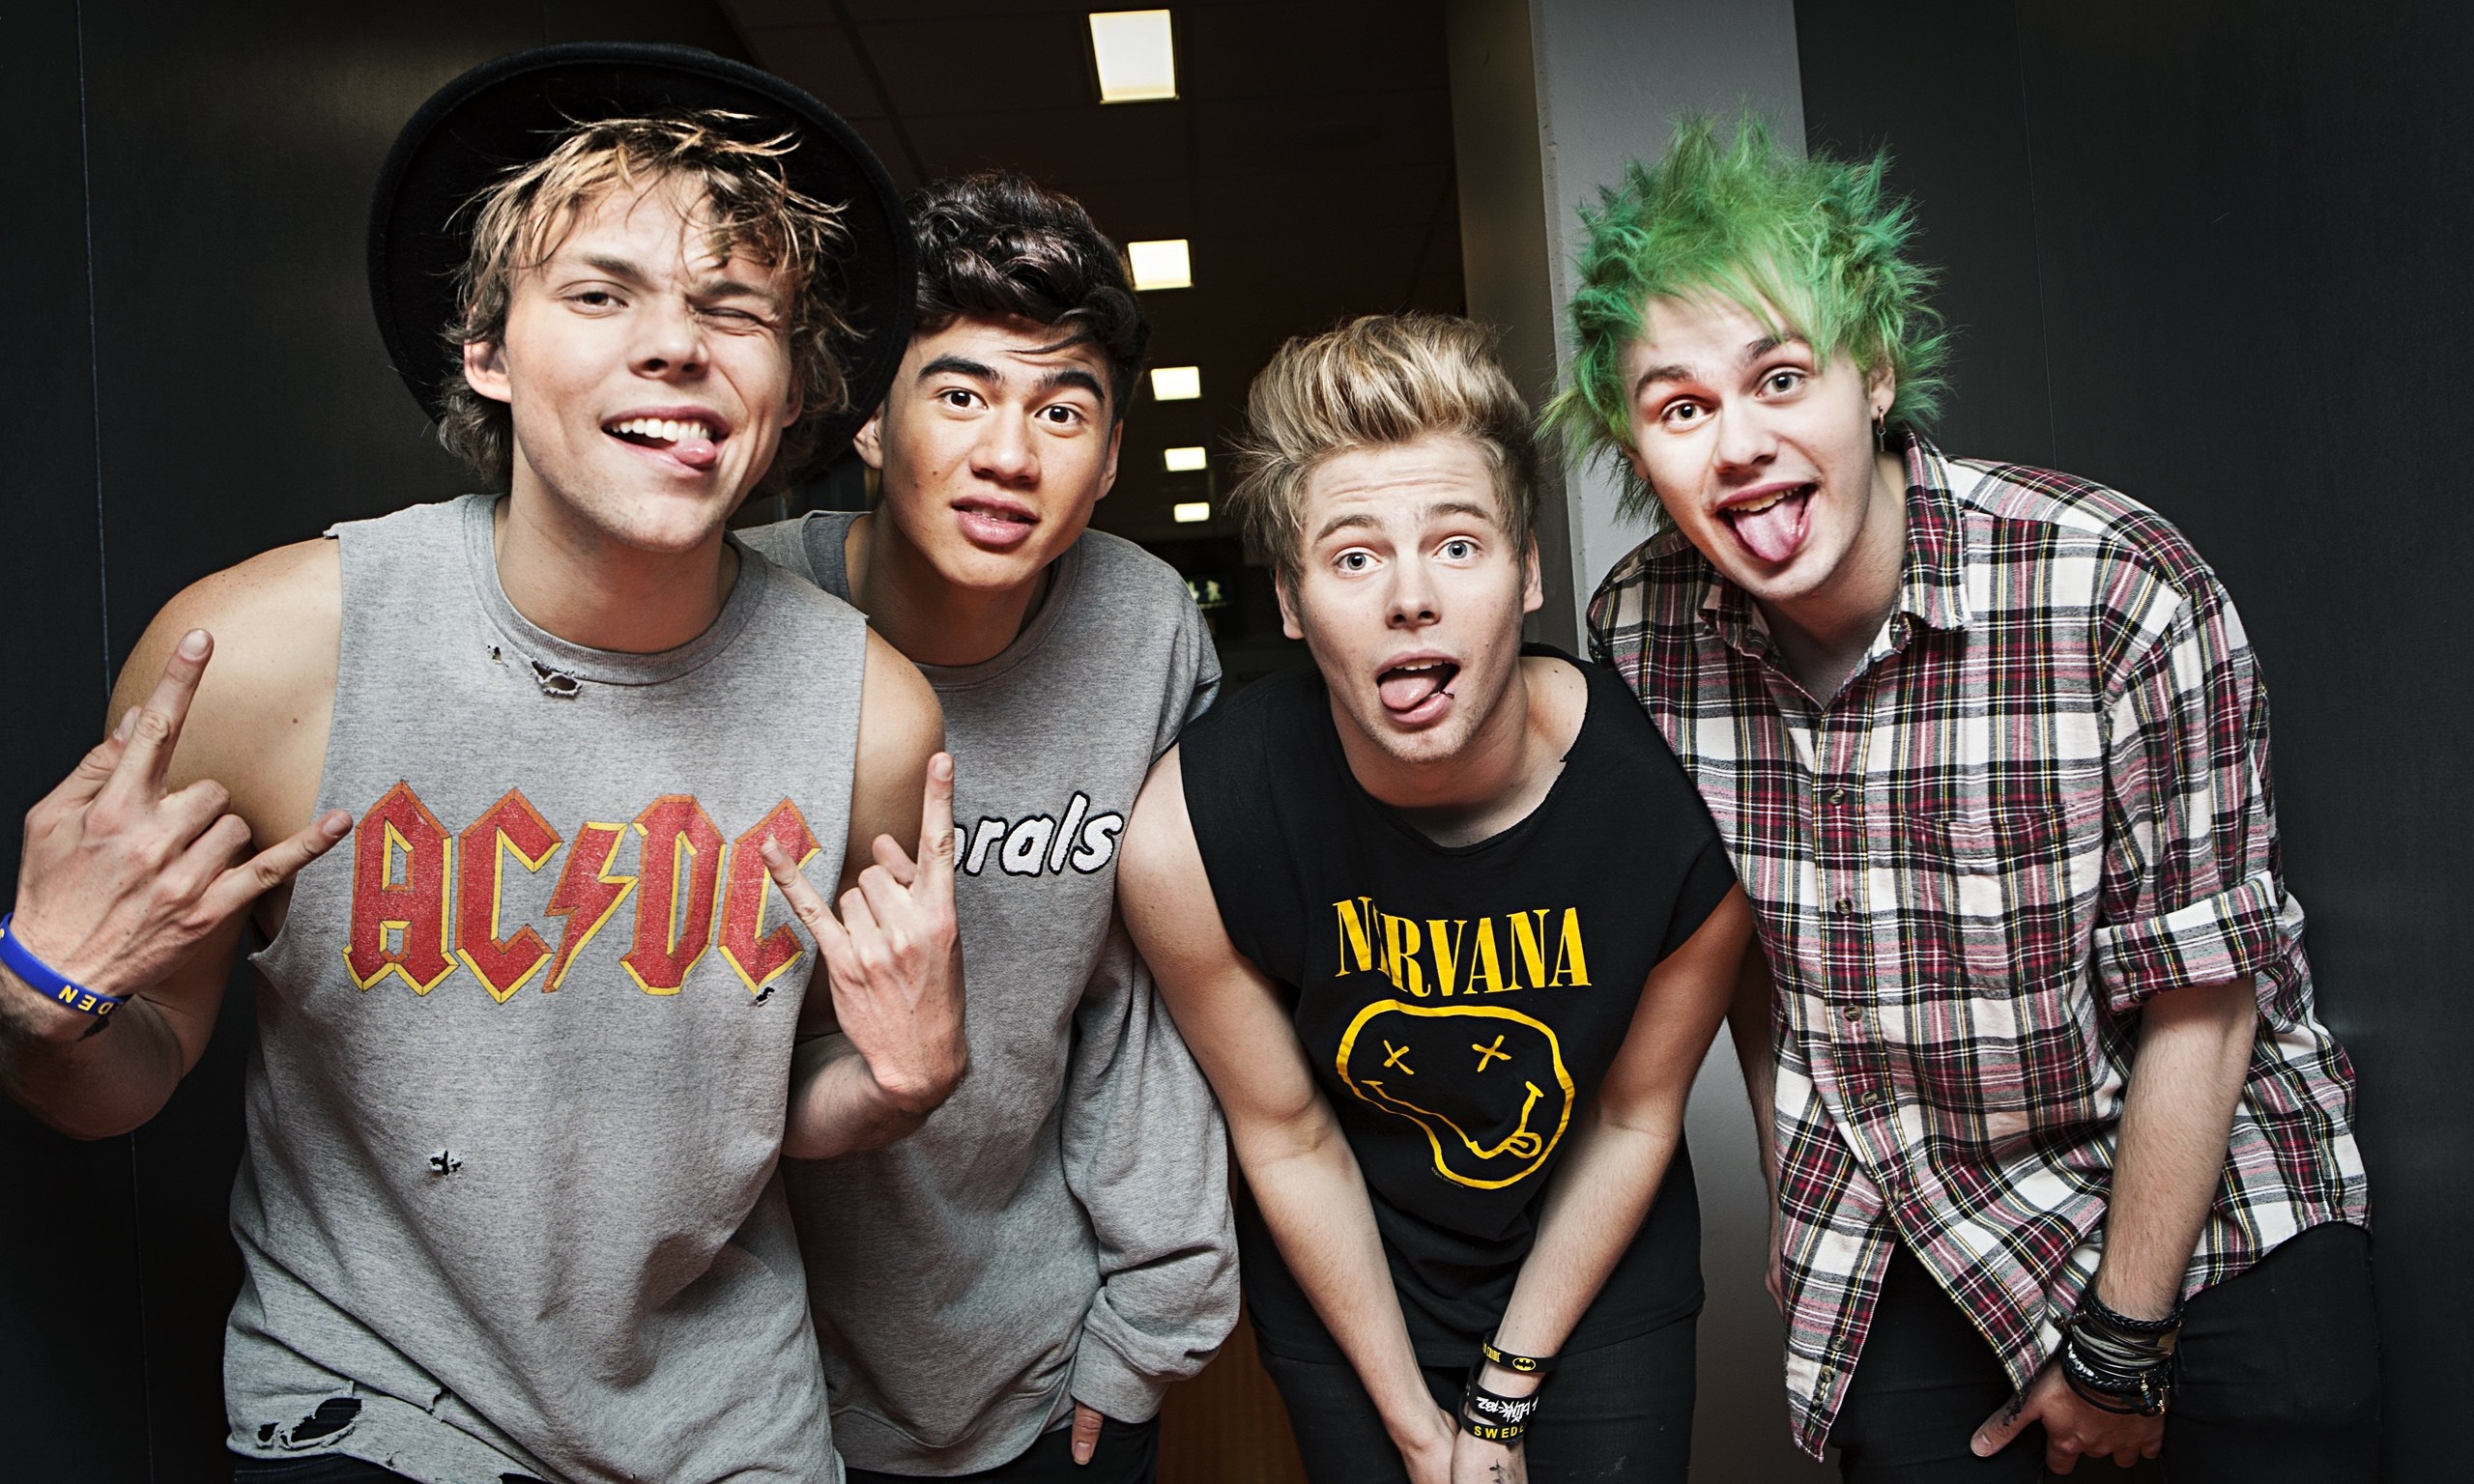 2560x1536 Seconds of Summer: punks or boyband? | Music | The Guardian